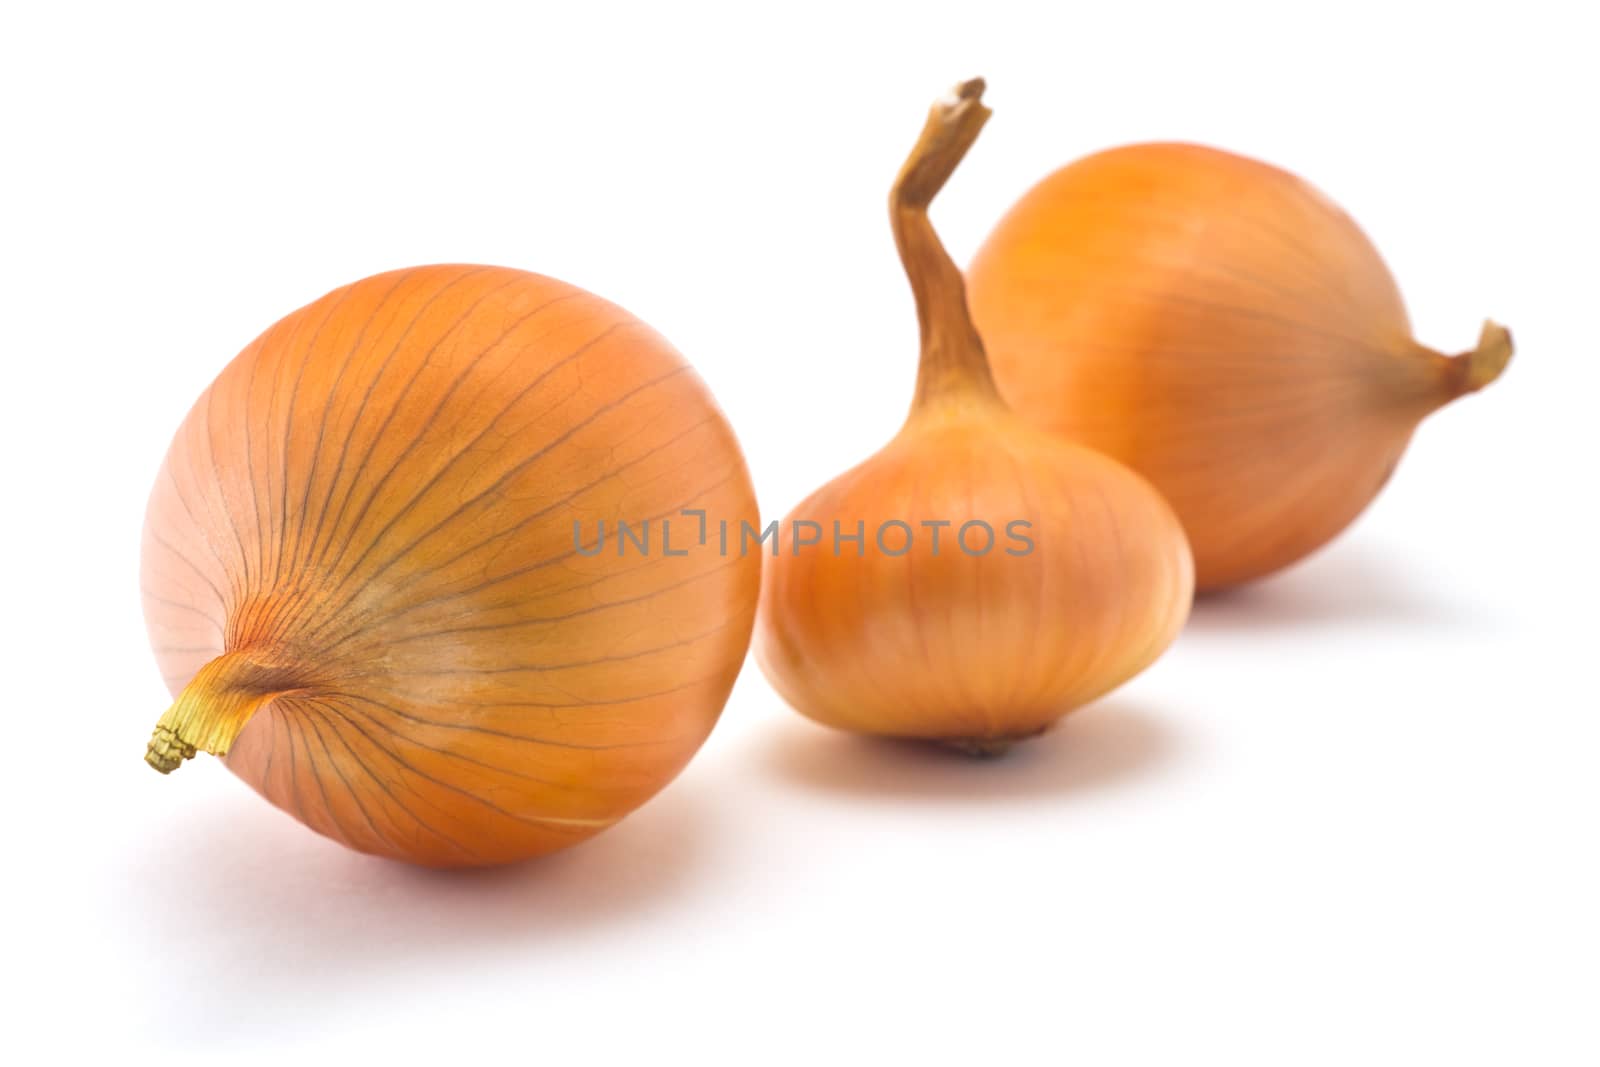 onions
onions on a white background
juicy onions
fresh onions
golden husks